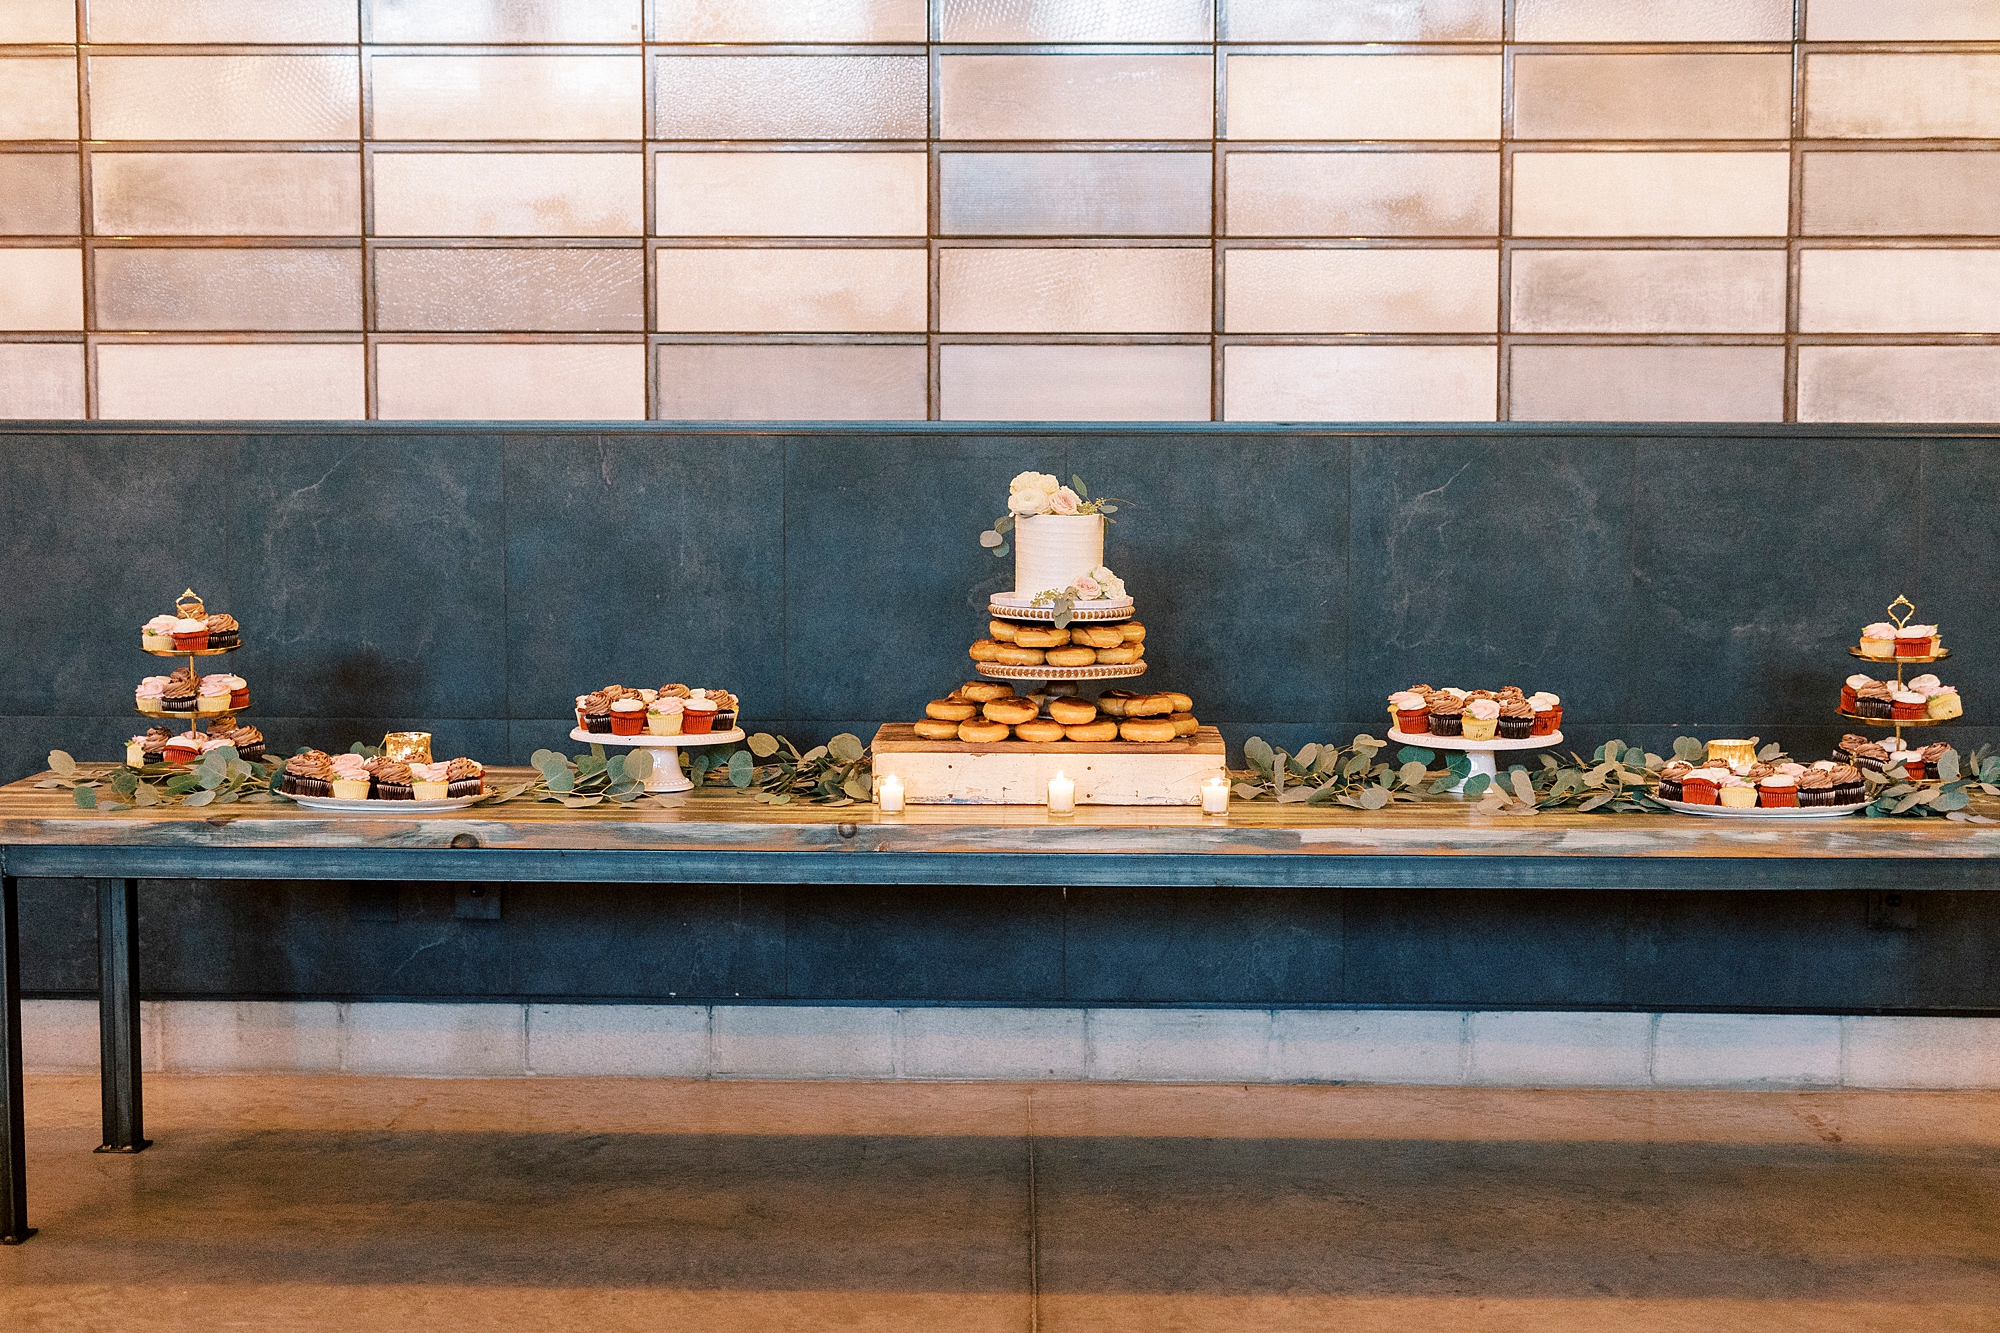 dessert display with cake and donuts at the Cadillac Service Garage